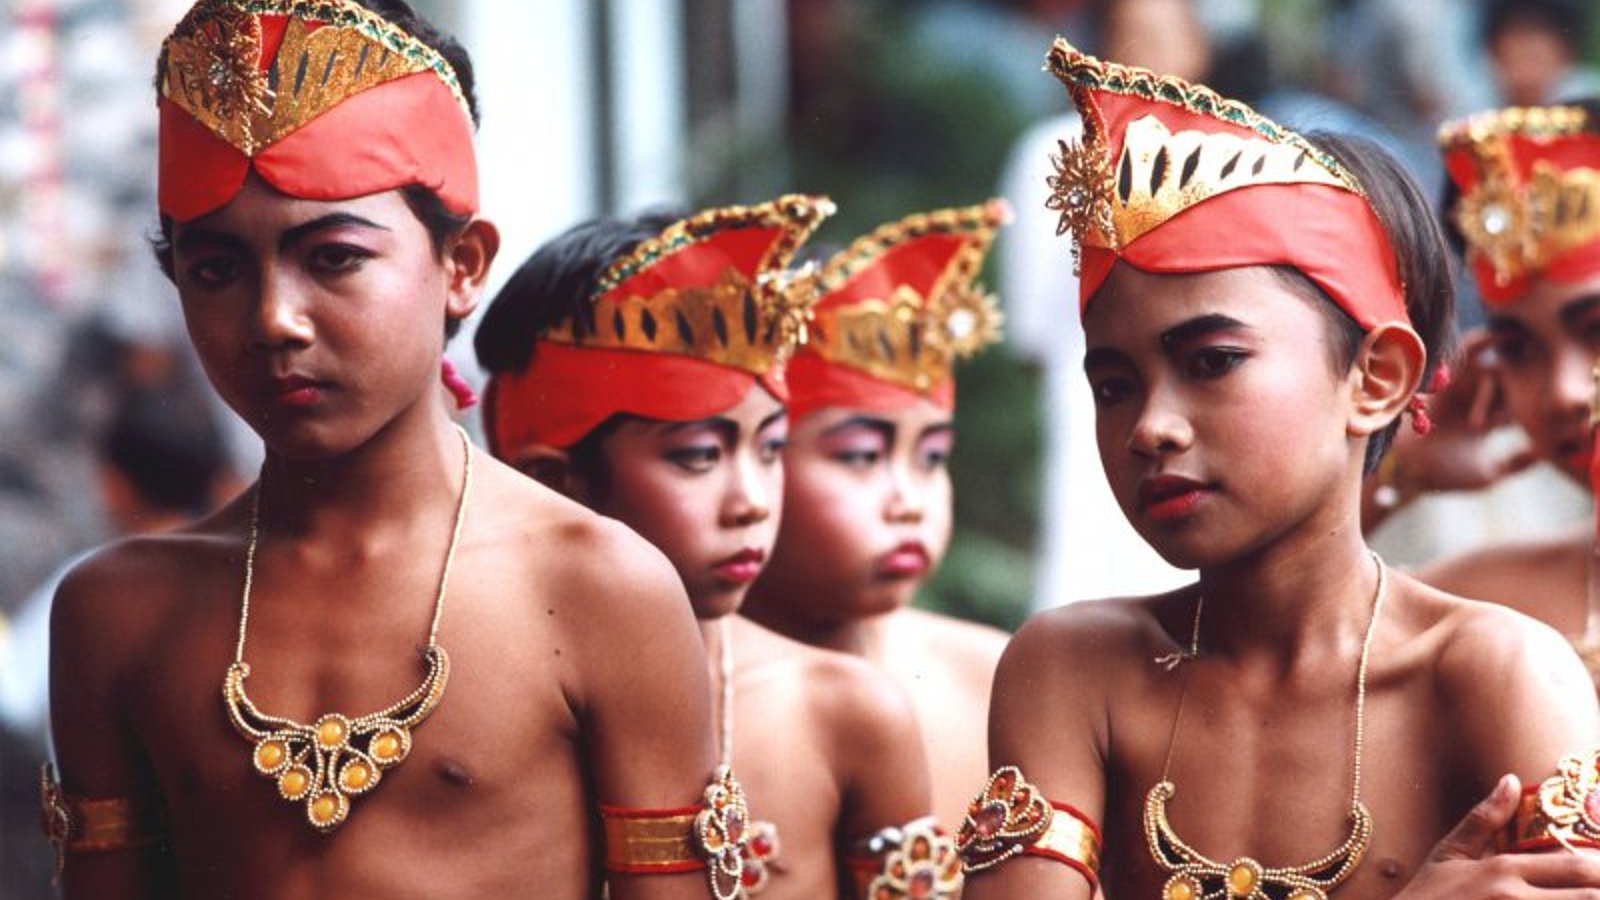 Jathilan: Trance and Possession in Java